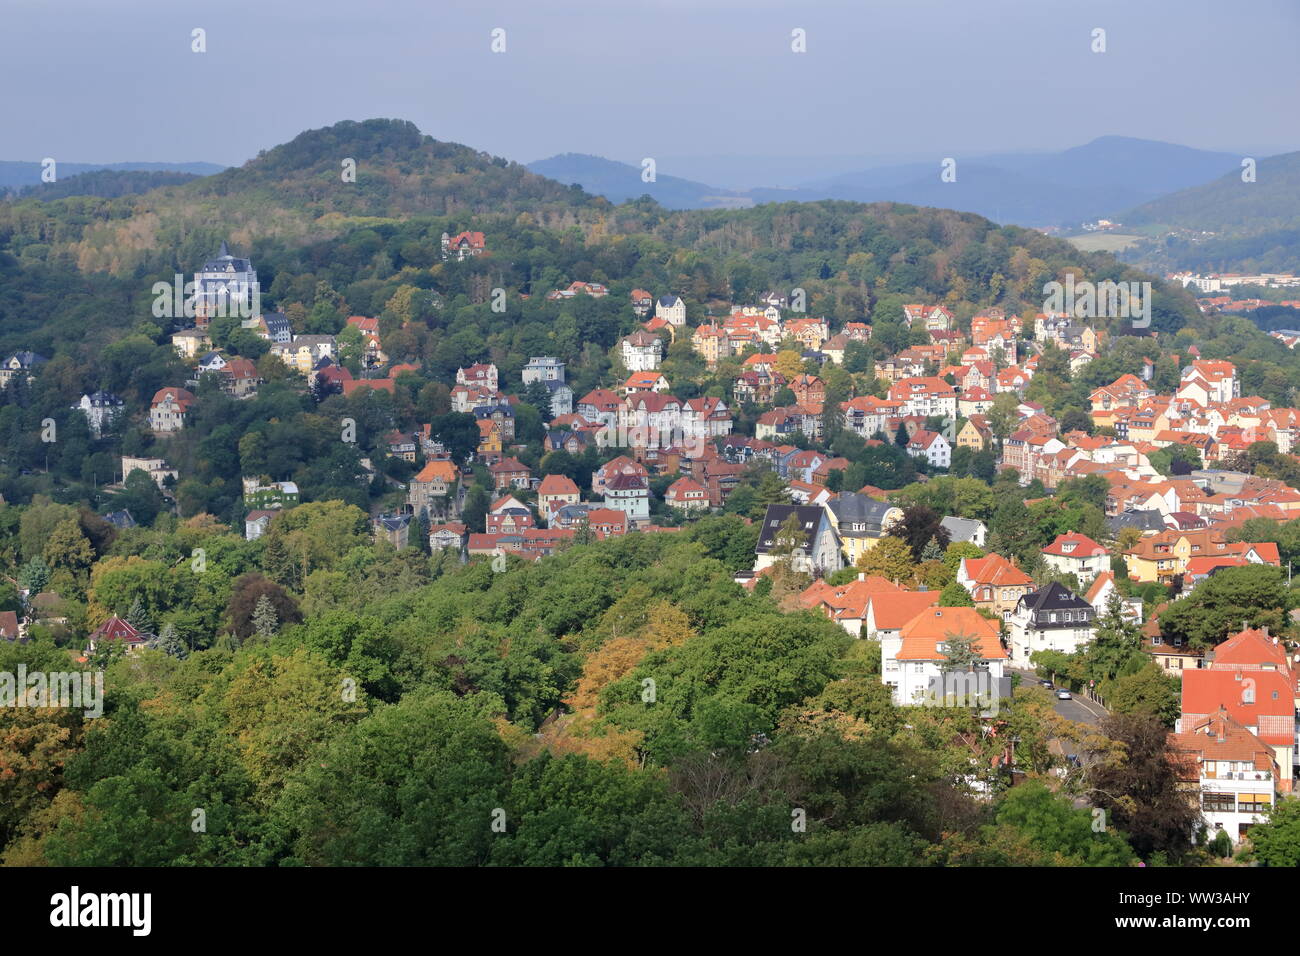 View over Eisenach, Thuringia in Germany Stock Photo